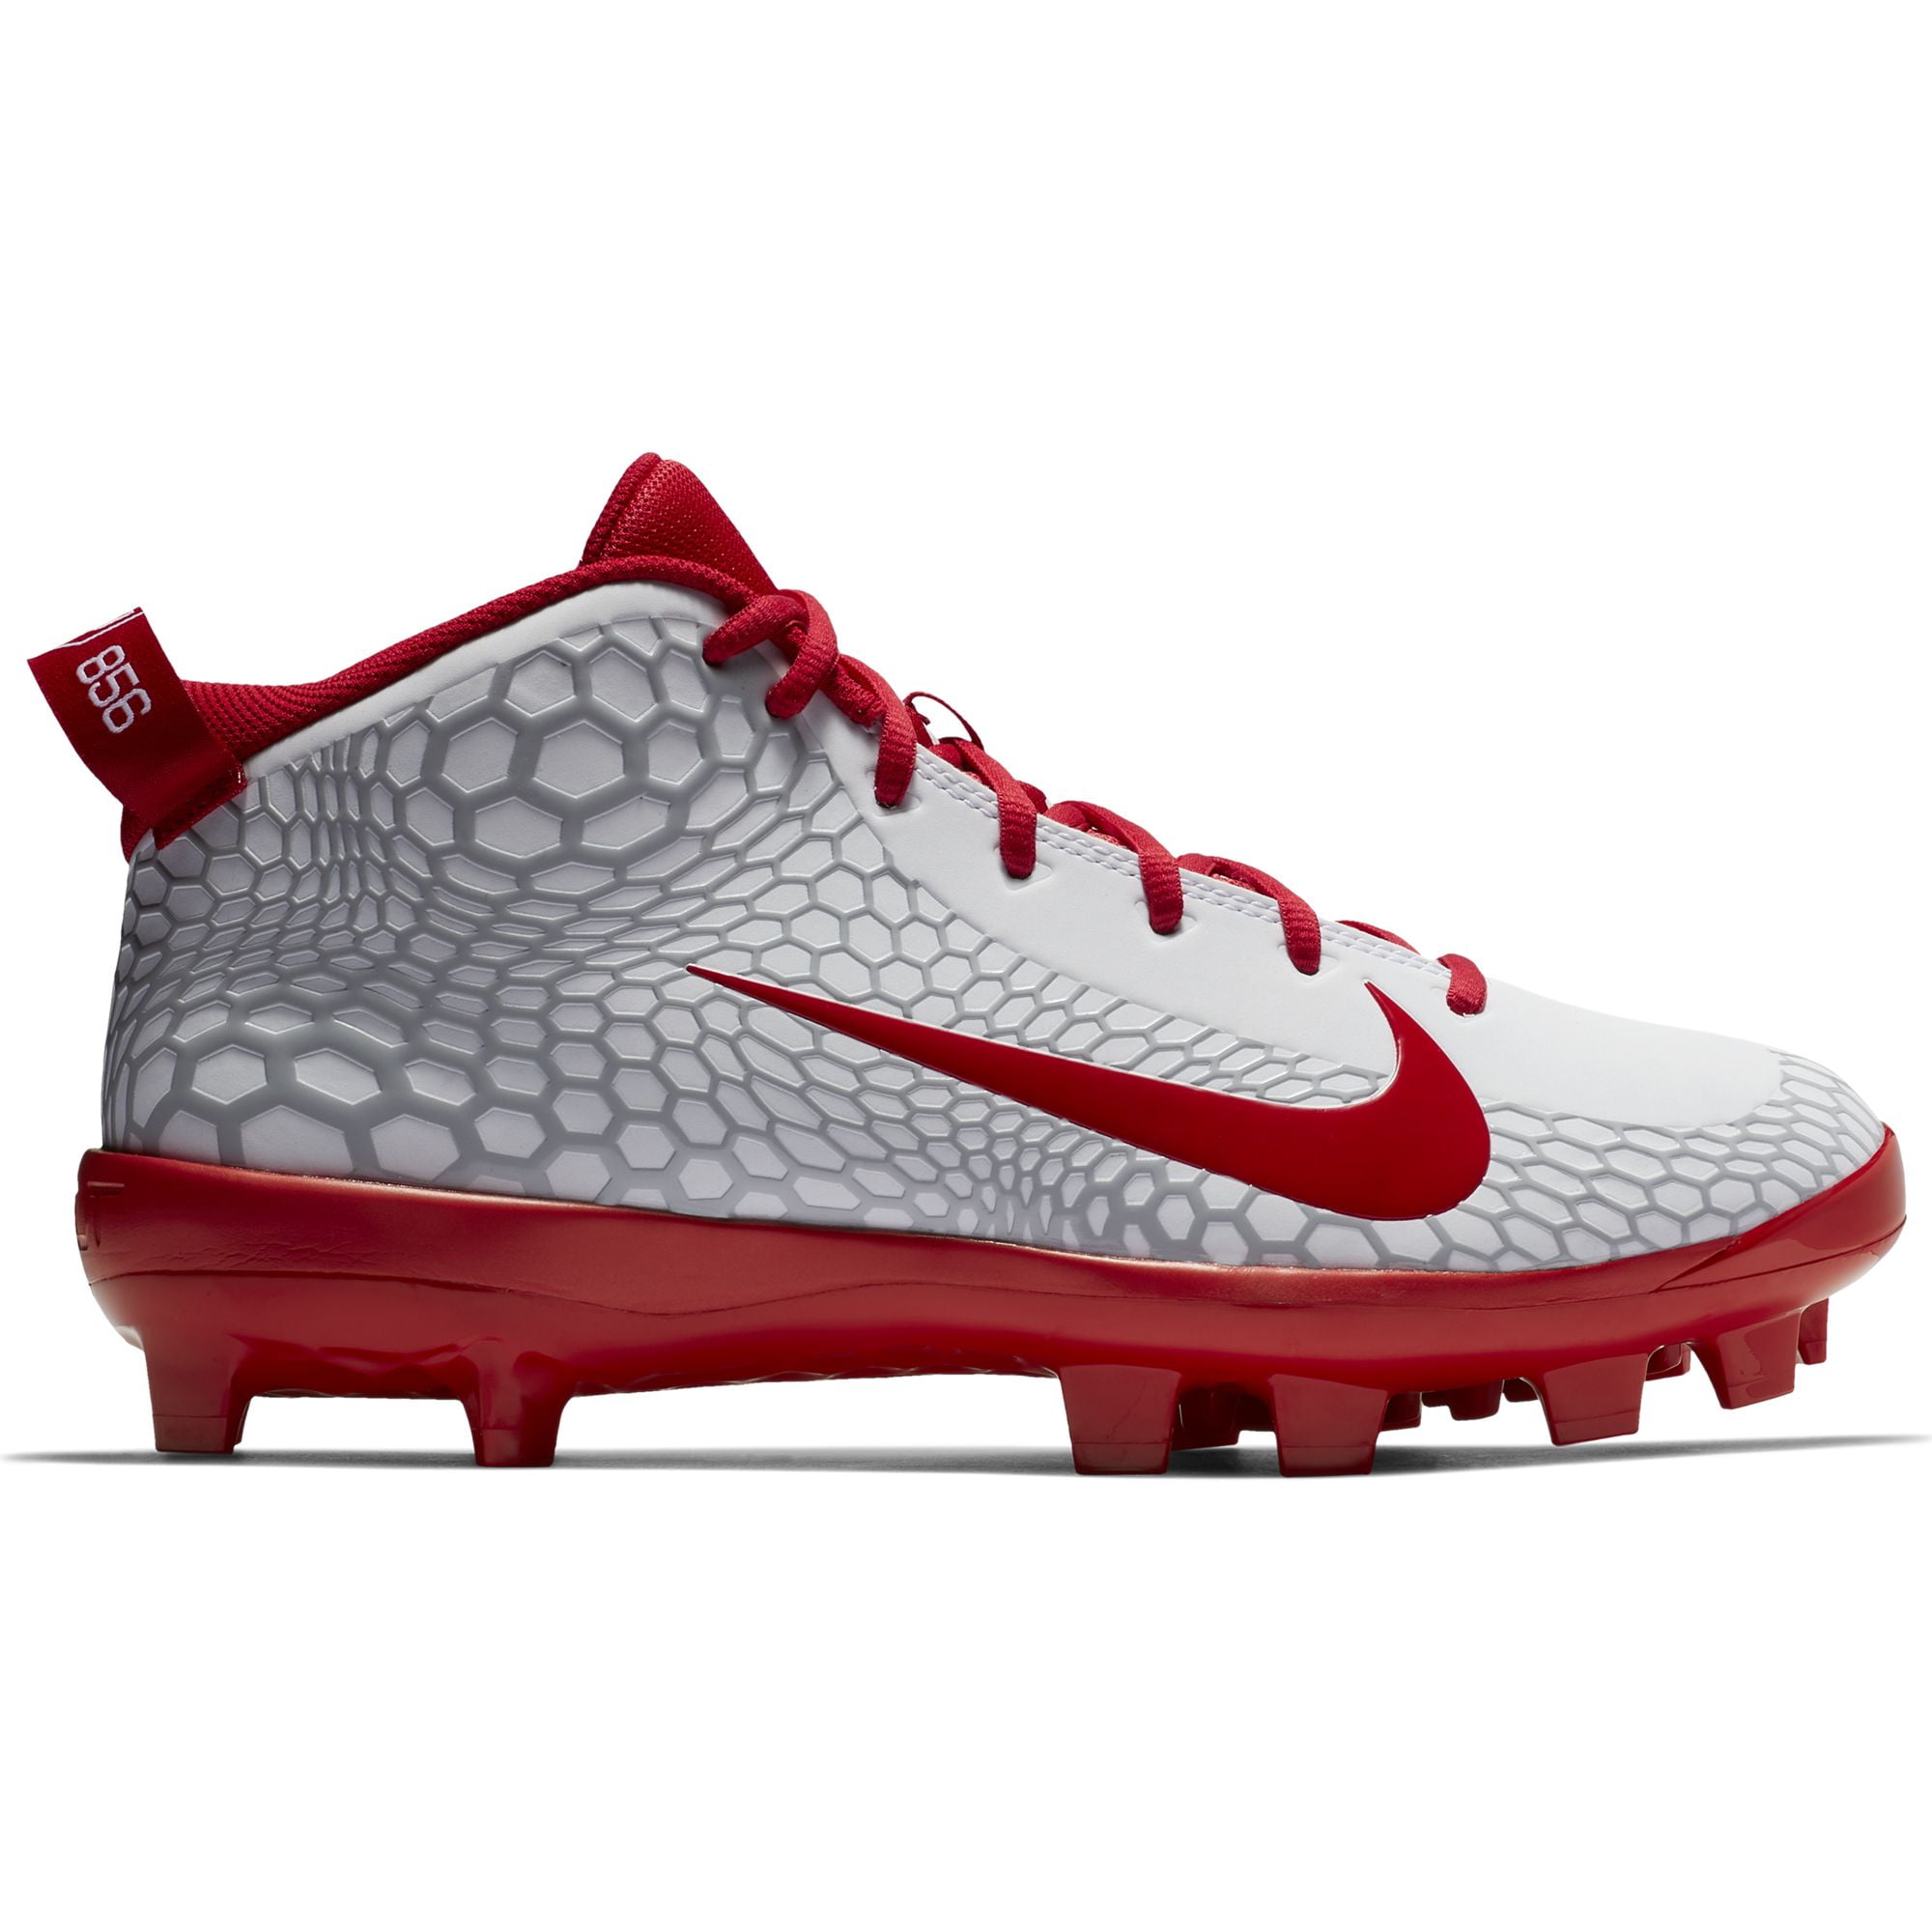 Mens Nike Molded Baseball Cleats Online Sale, UP TO 8 OFF